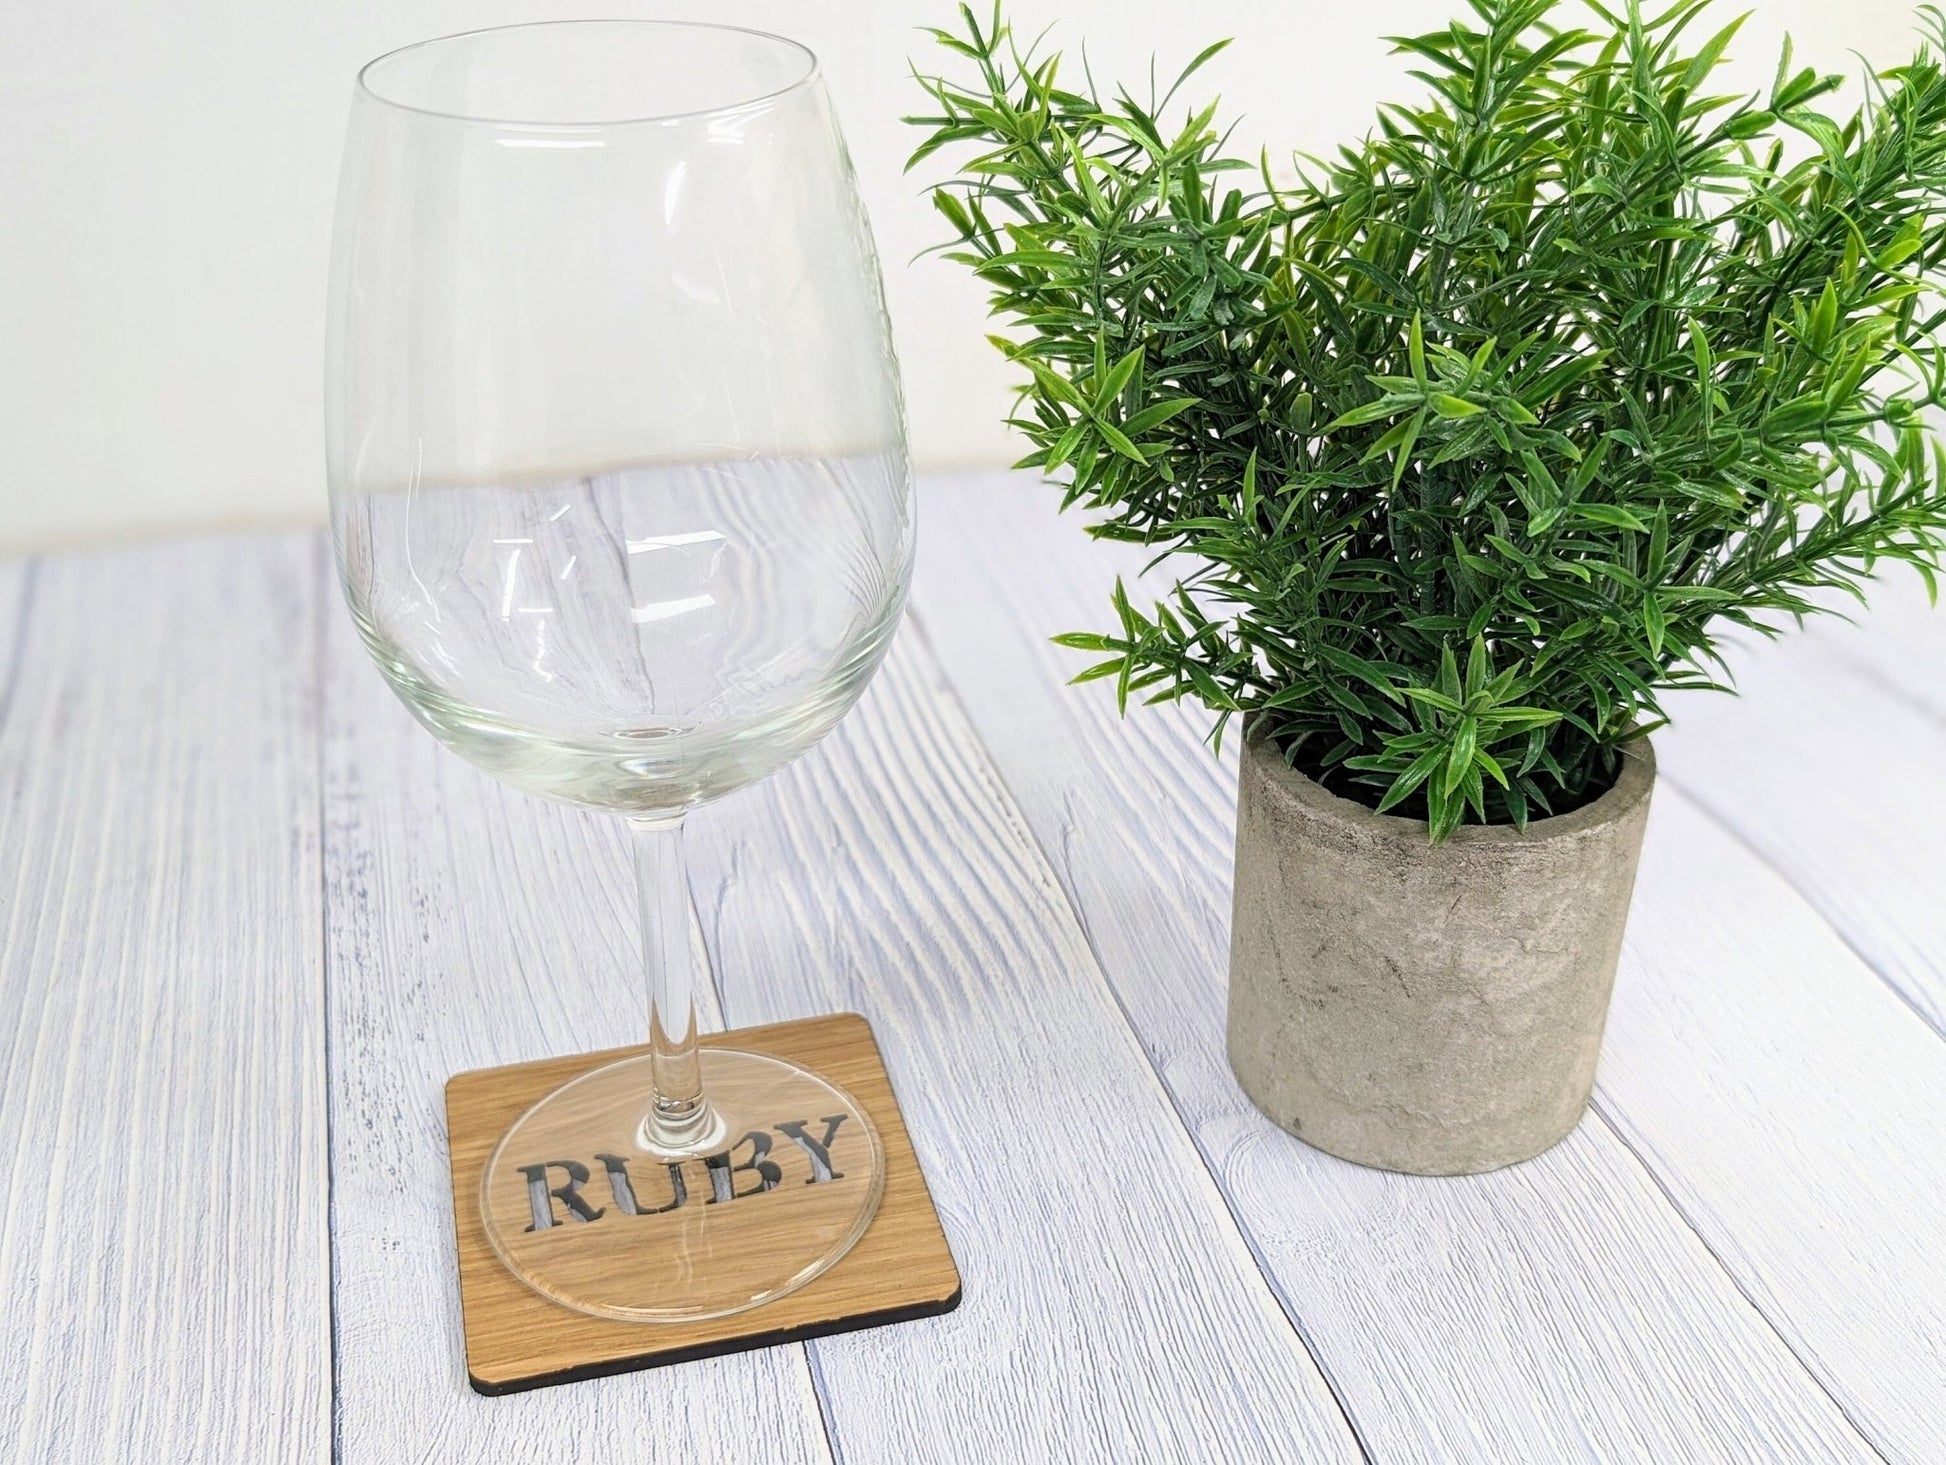 Personalised Wooden Square Coasters - Name Cut-Out - CherryGroveCraft